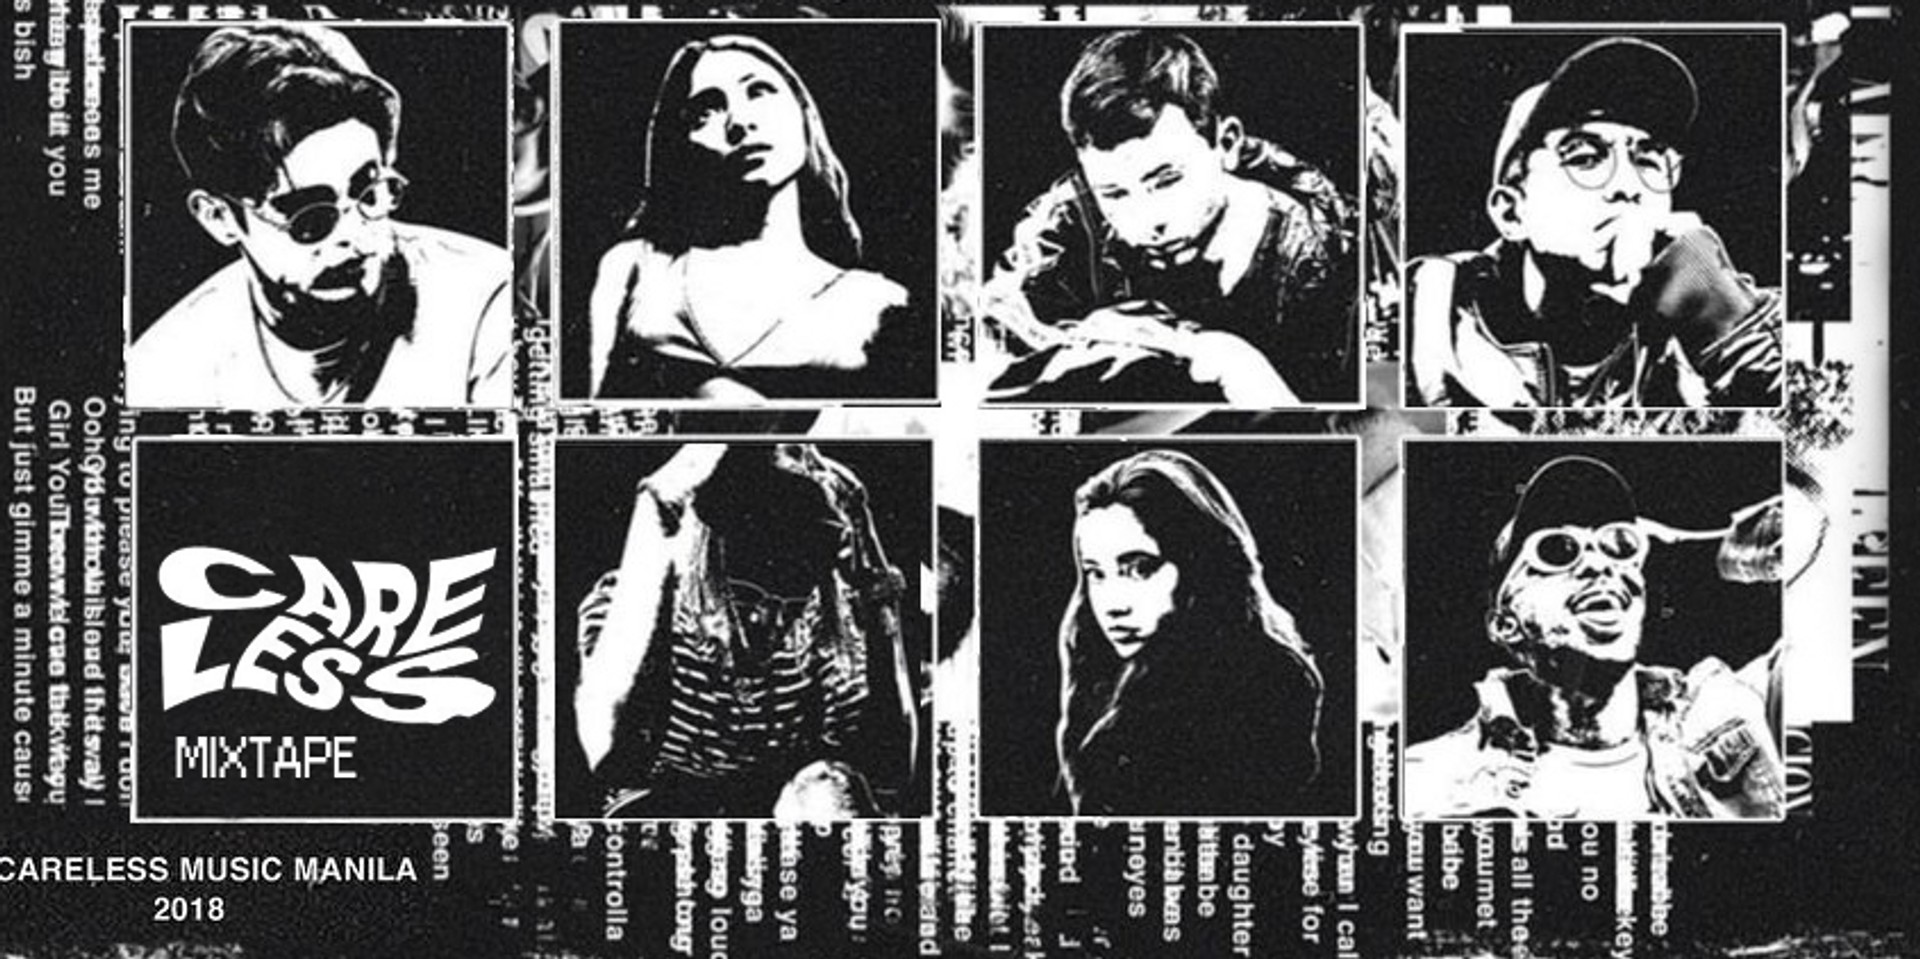 The Careless Mixtape featuring James Reid, Nadine Lustre, Curtismith, and more is here – listen